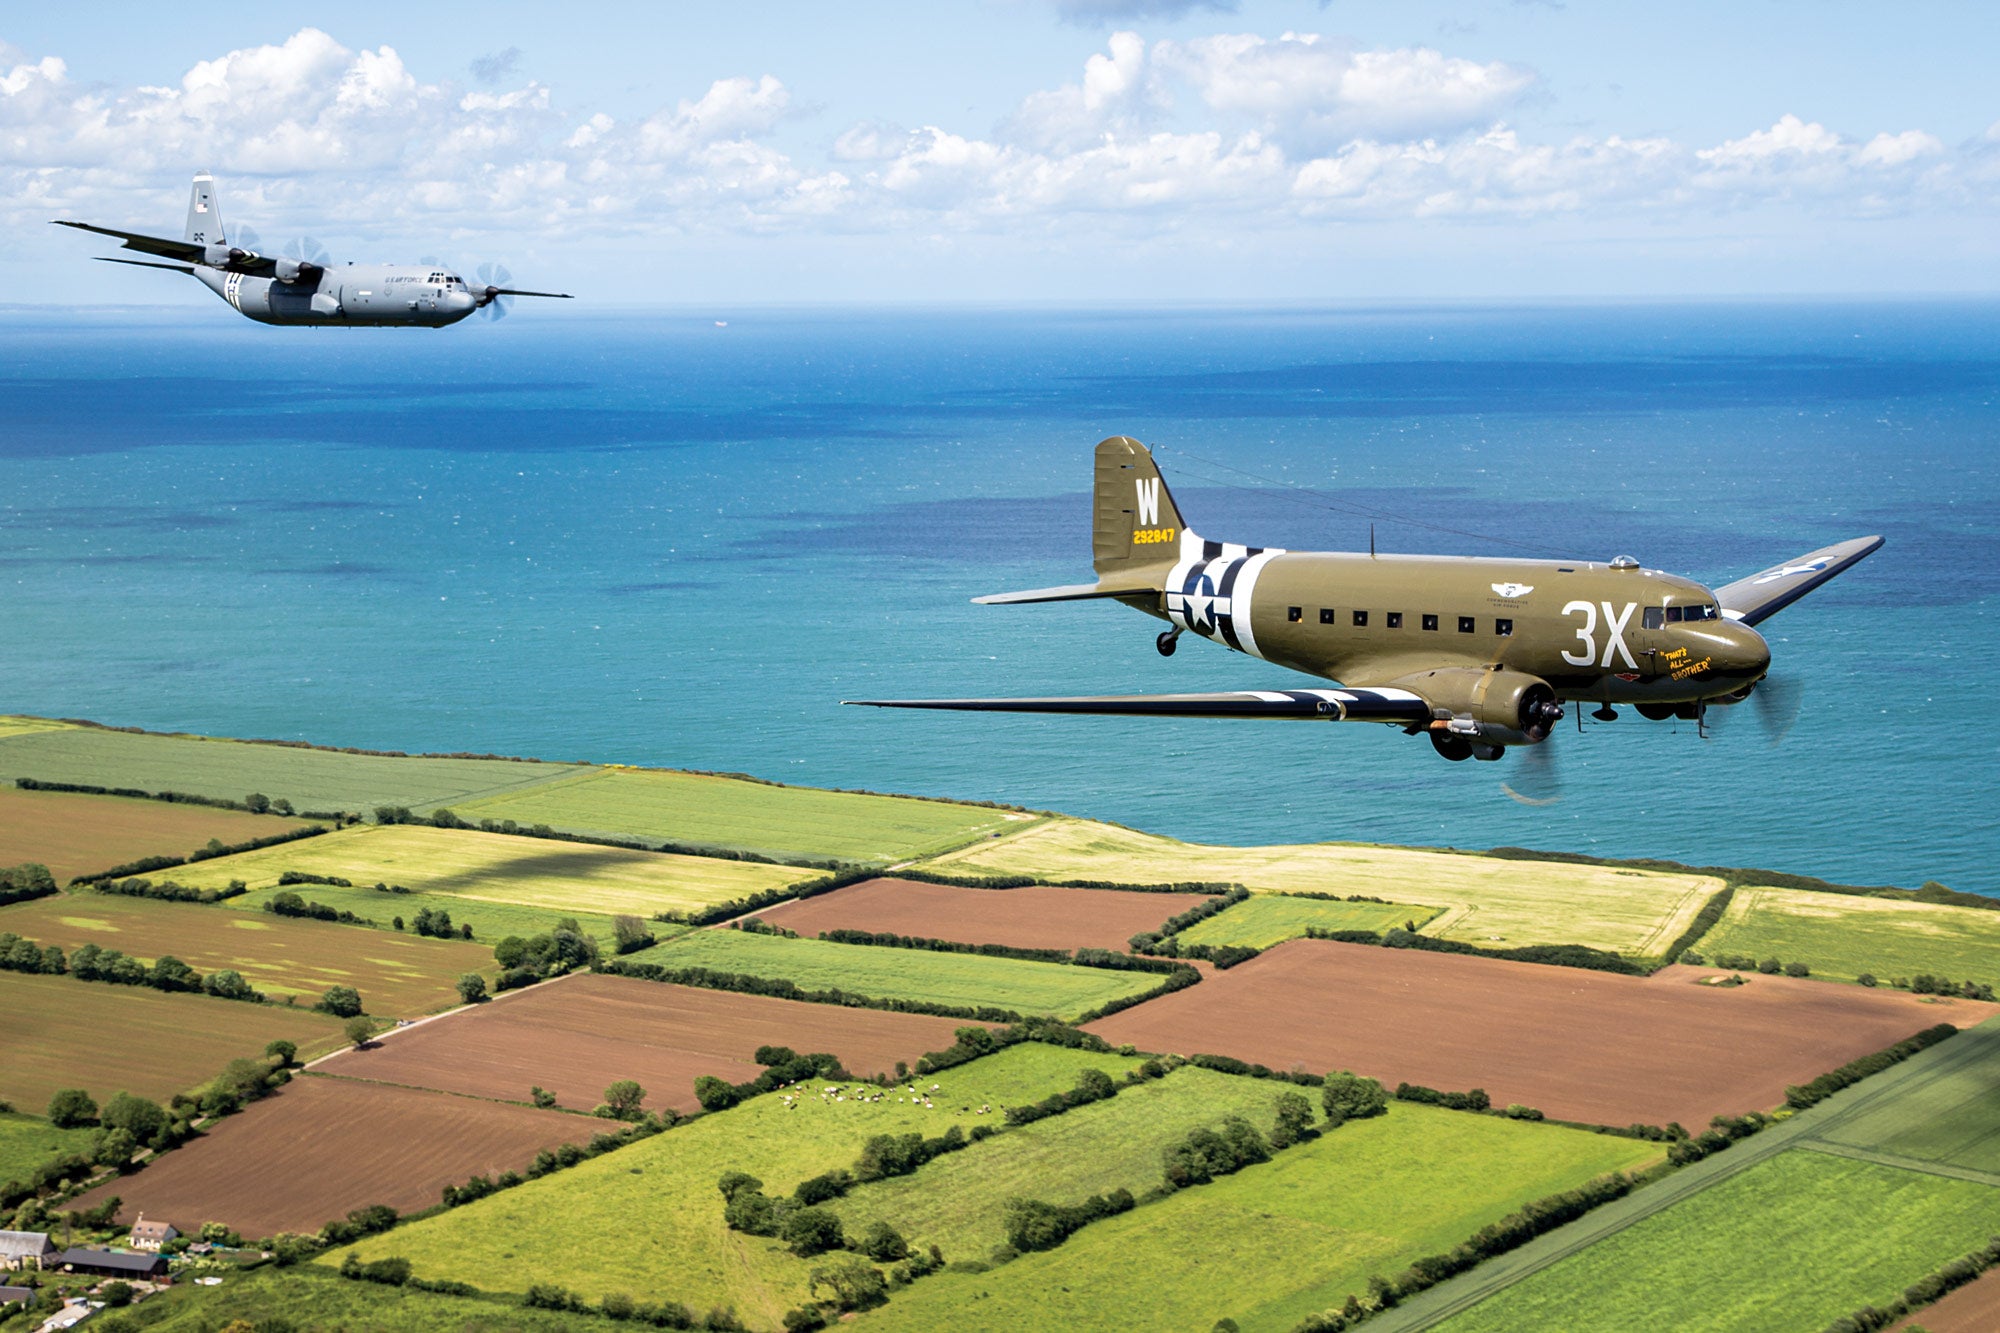 C-47s of the D-Day Squadron joined current military aircraft